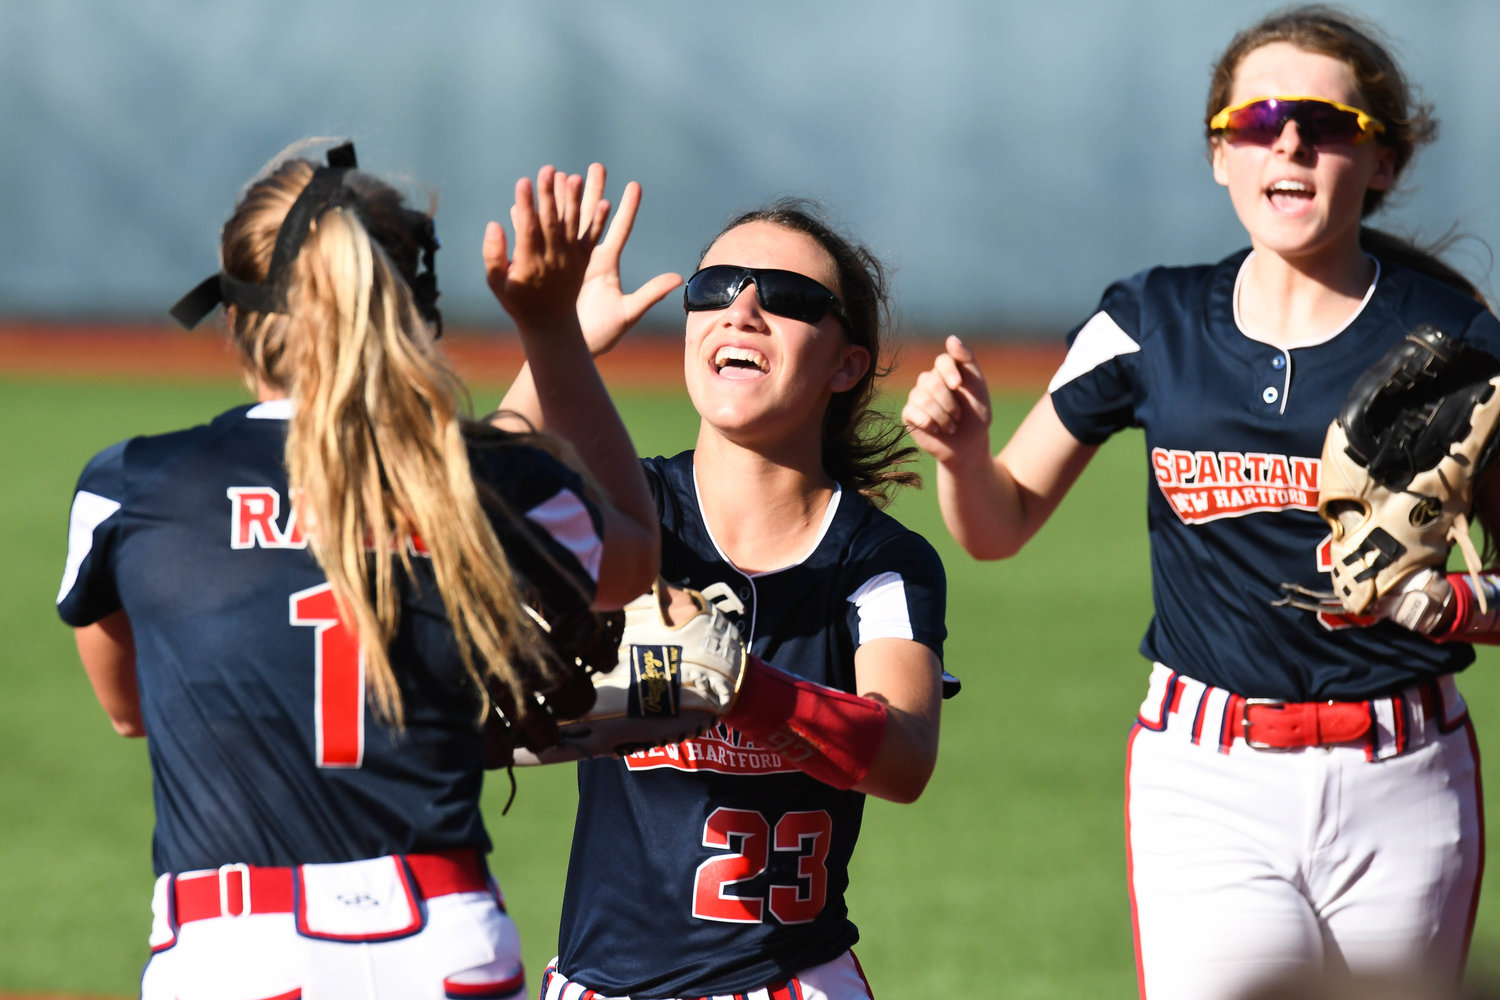 New Hartford player Olivia Vitullo (23) celebrates with teammate Taylor Raux (1) after making a play in the outfield during the Section III Class A final against Auburn on Thursday at Onondaga Community College.